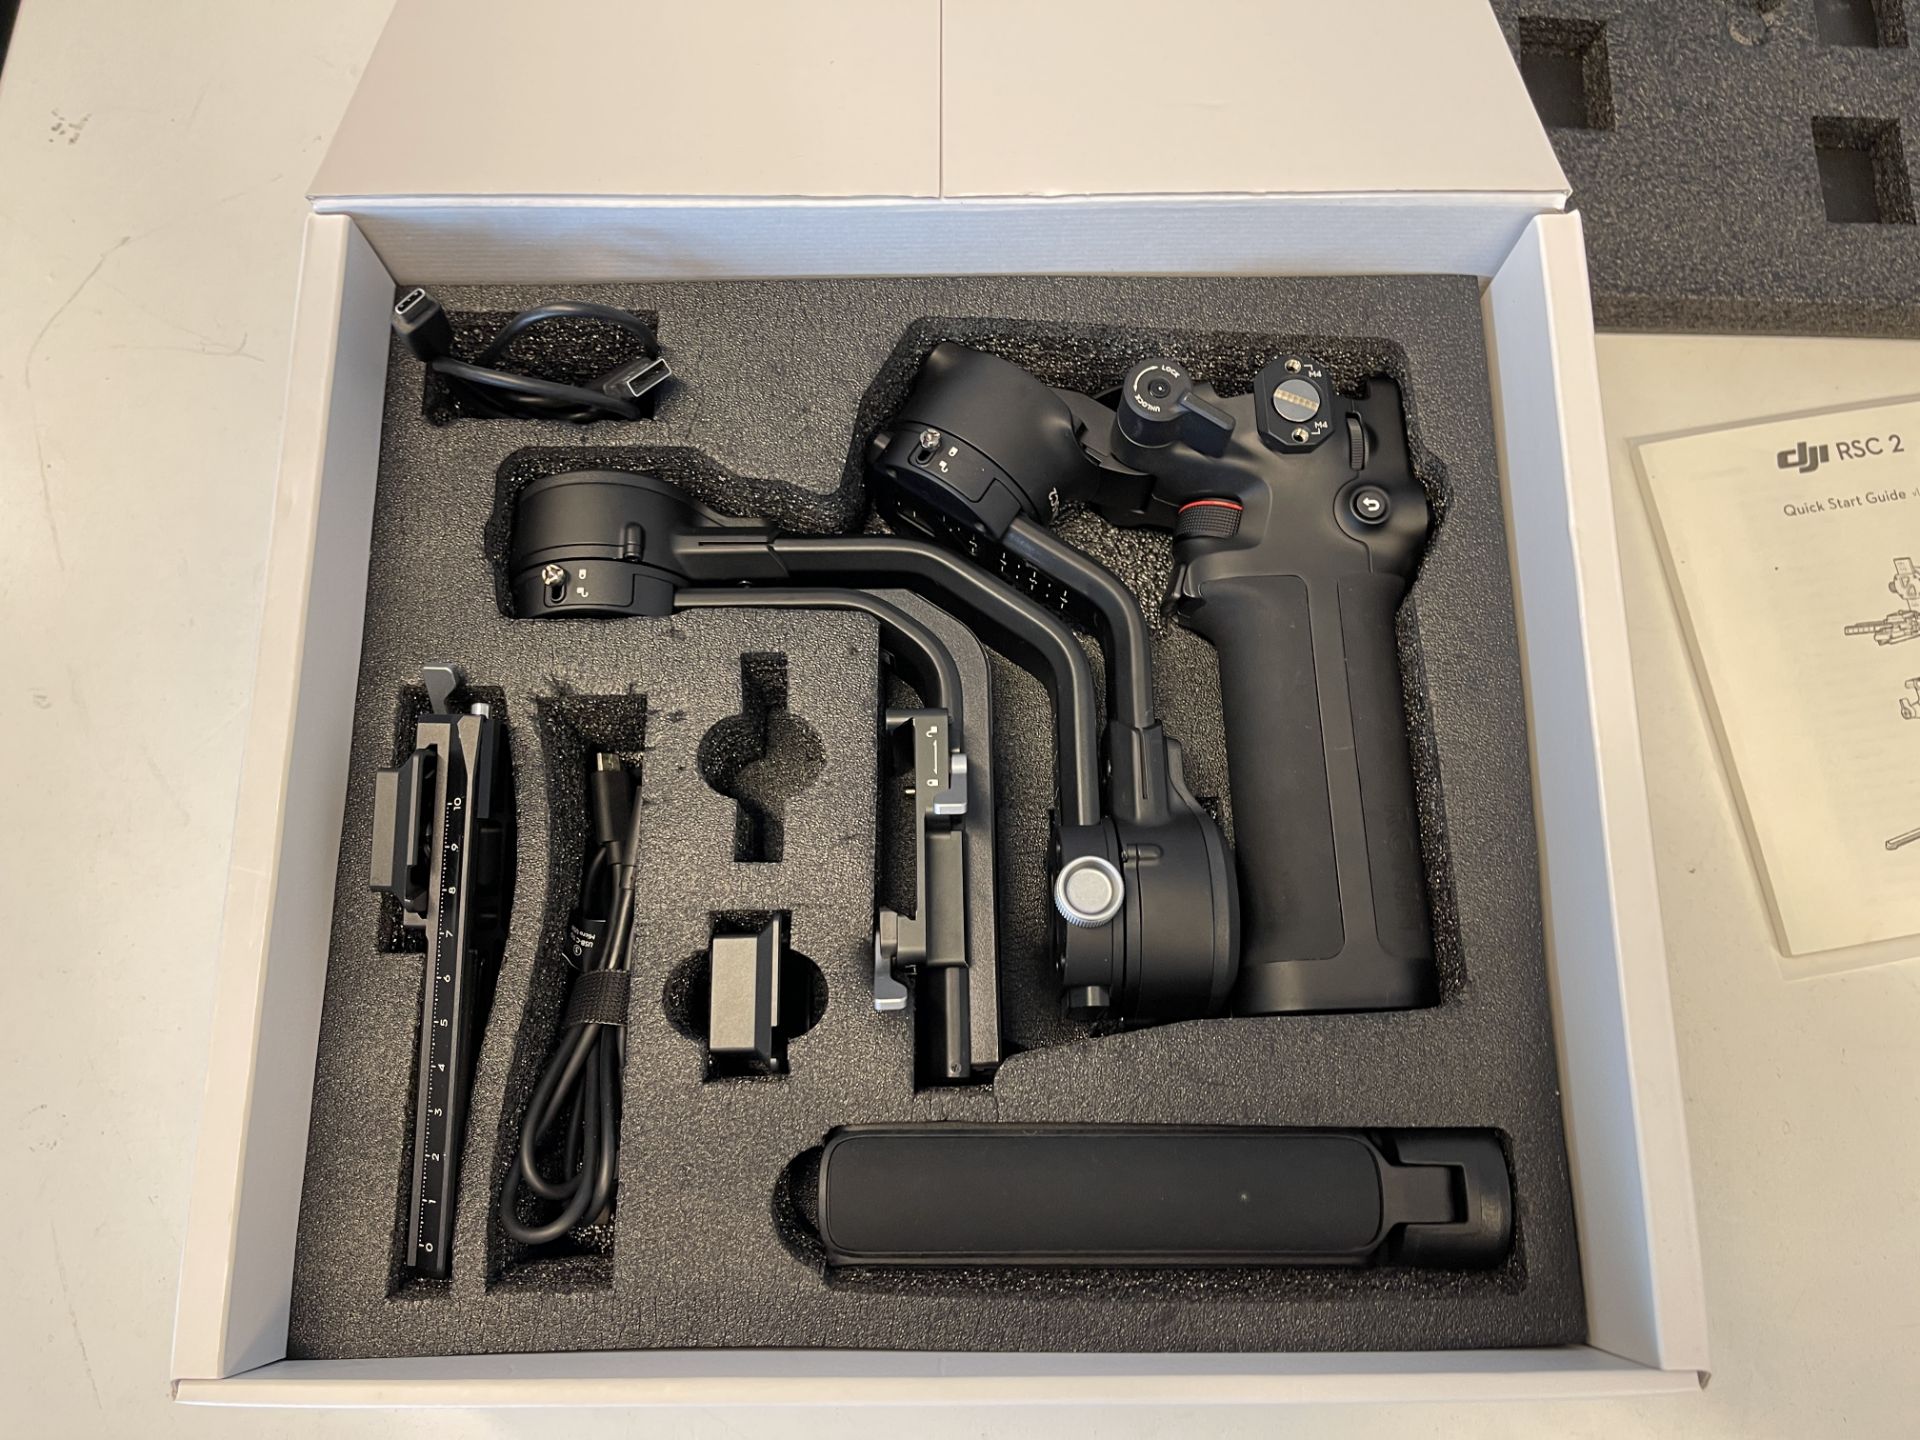 DJI RSC 2 Ronin Handheld Gimble Complete with Accessories & Case (RRP £400) - Image 8 of 9